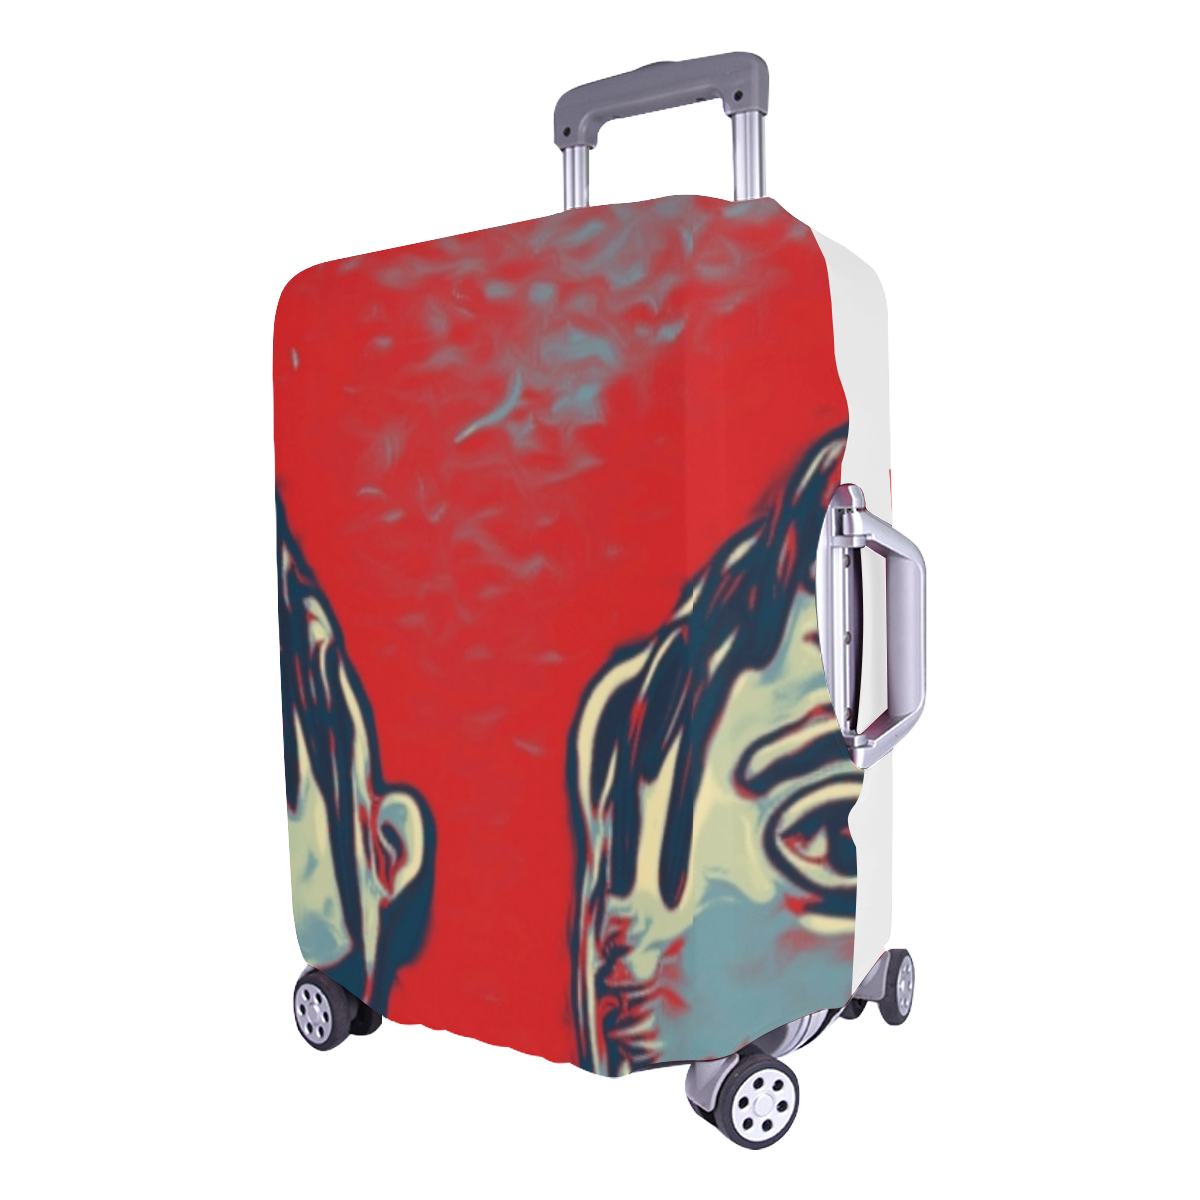 2 Kings Luggage Cover/Large 26"-28"